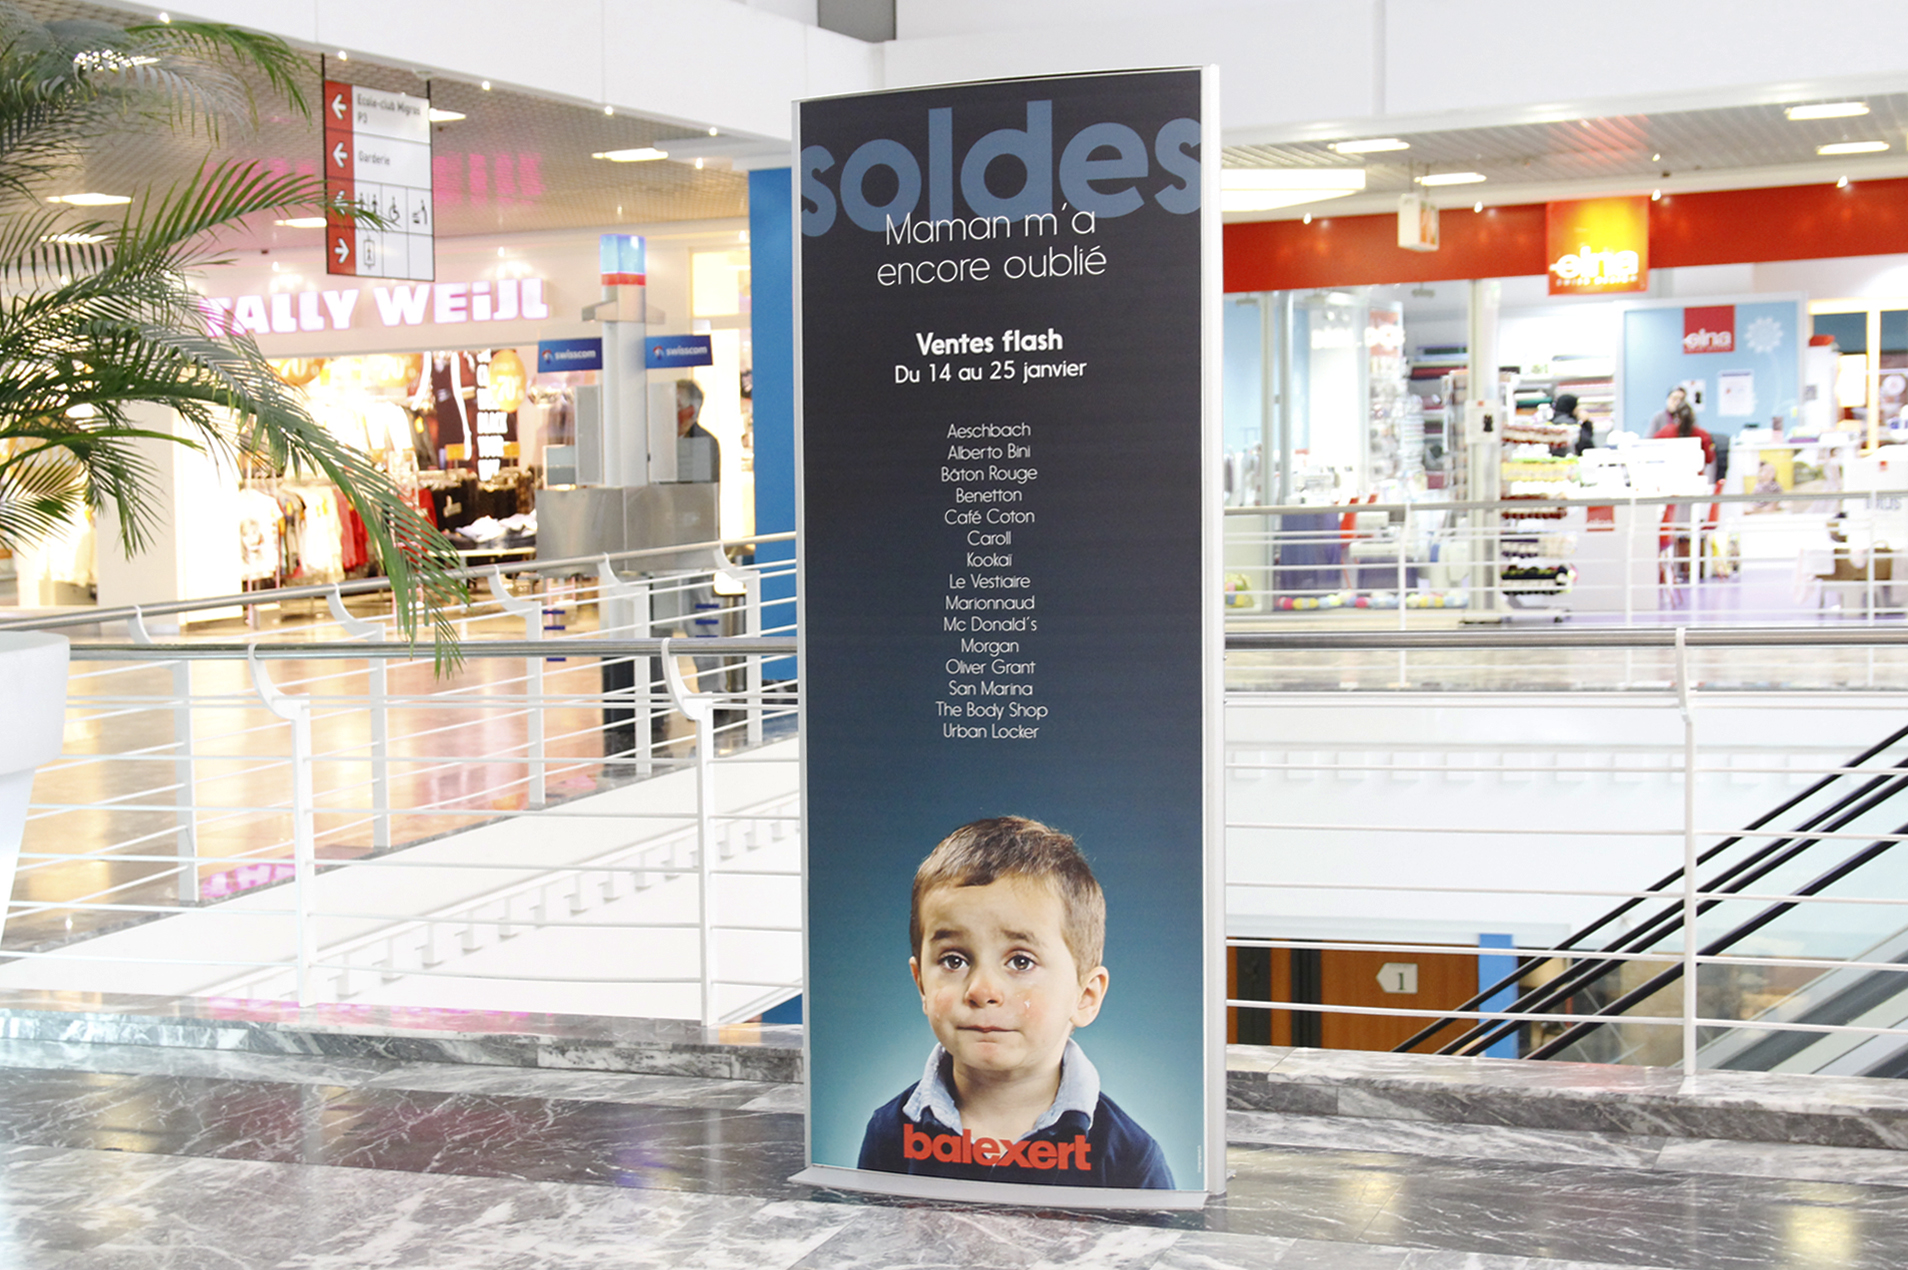 Display of a totem continuing the theme of the print advertising campaign in the shopping mall